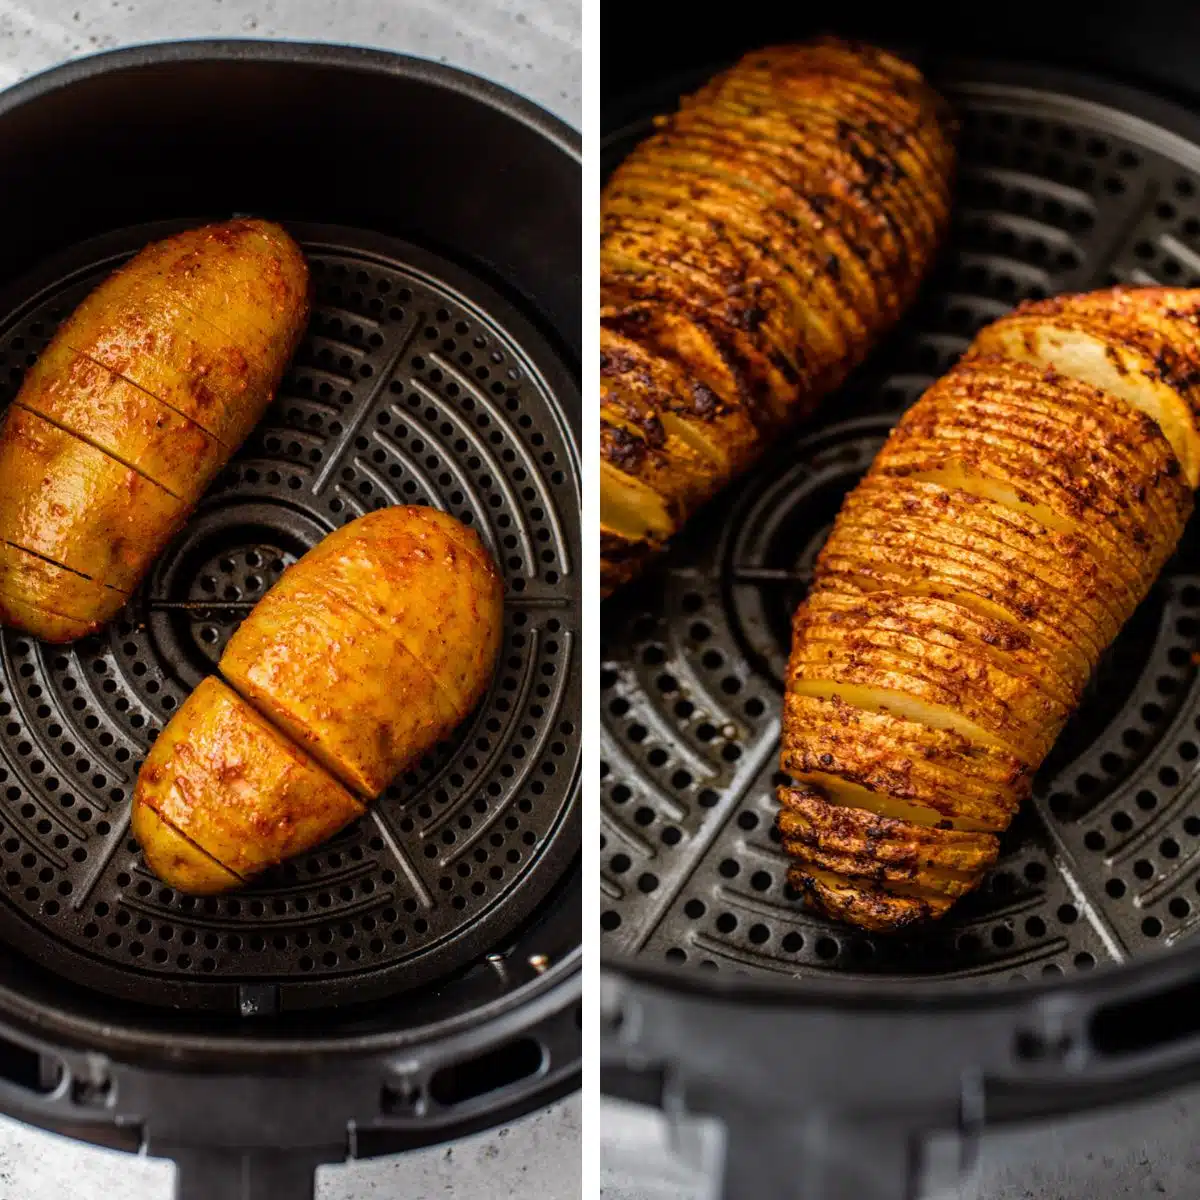 2 images: the left image shows hasselback potatoes in an air fryer and the right image shows the potatoes crispy and browned inside the air fryer